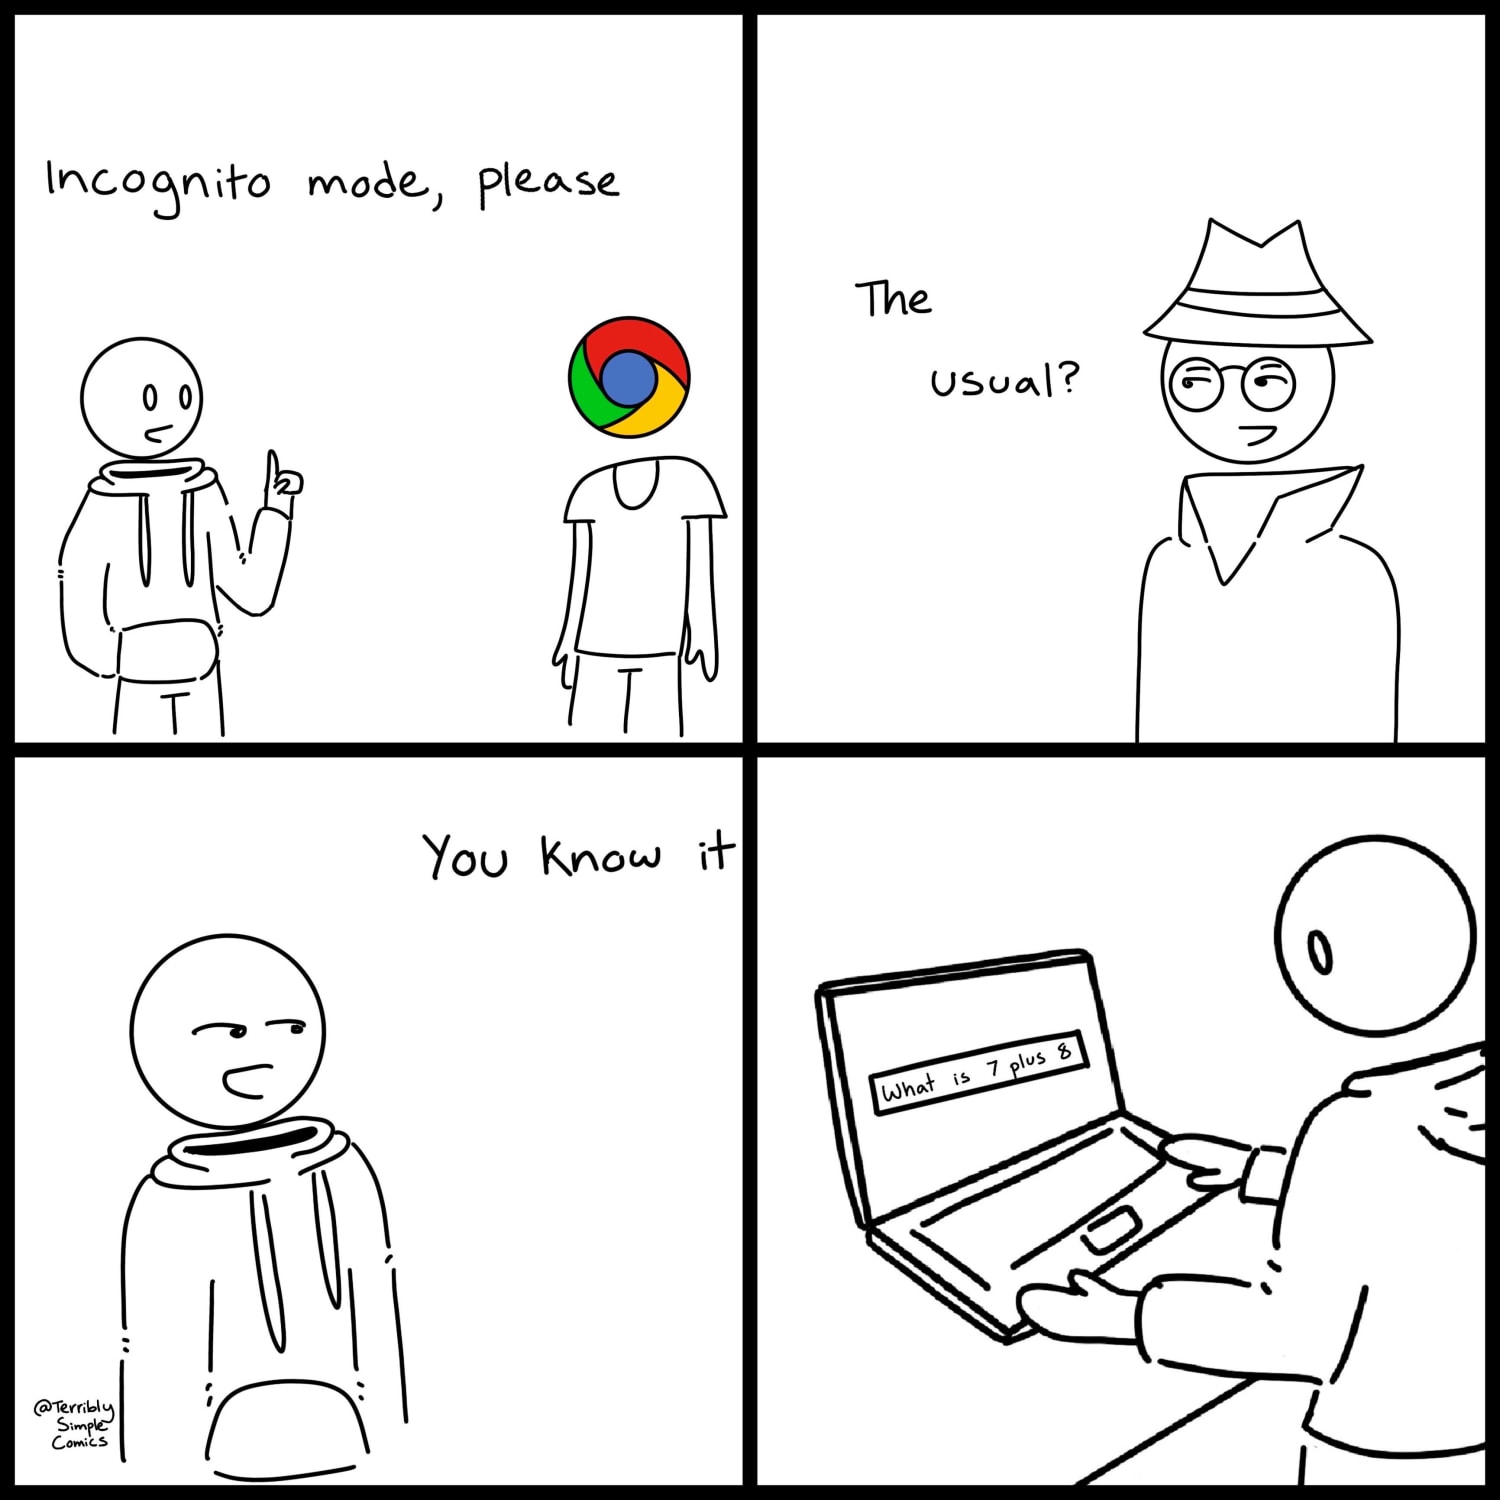 What we really use incognito for